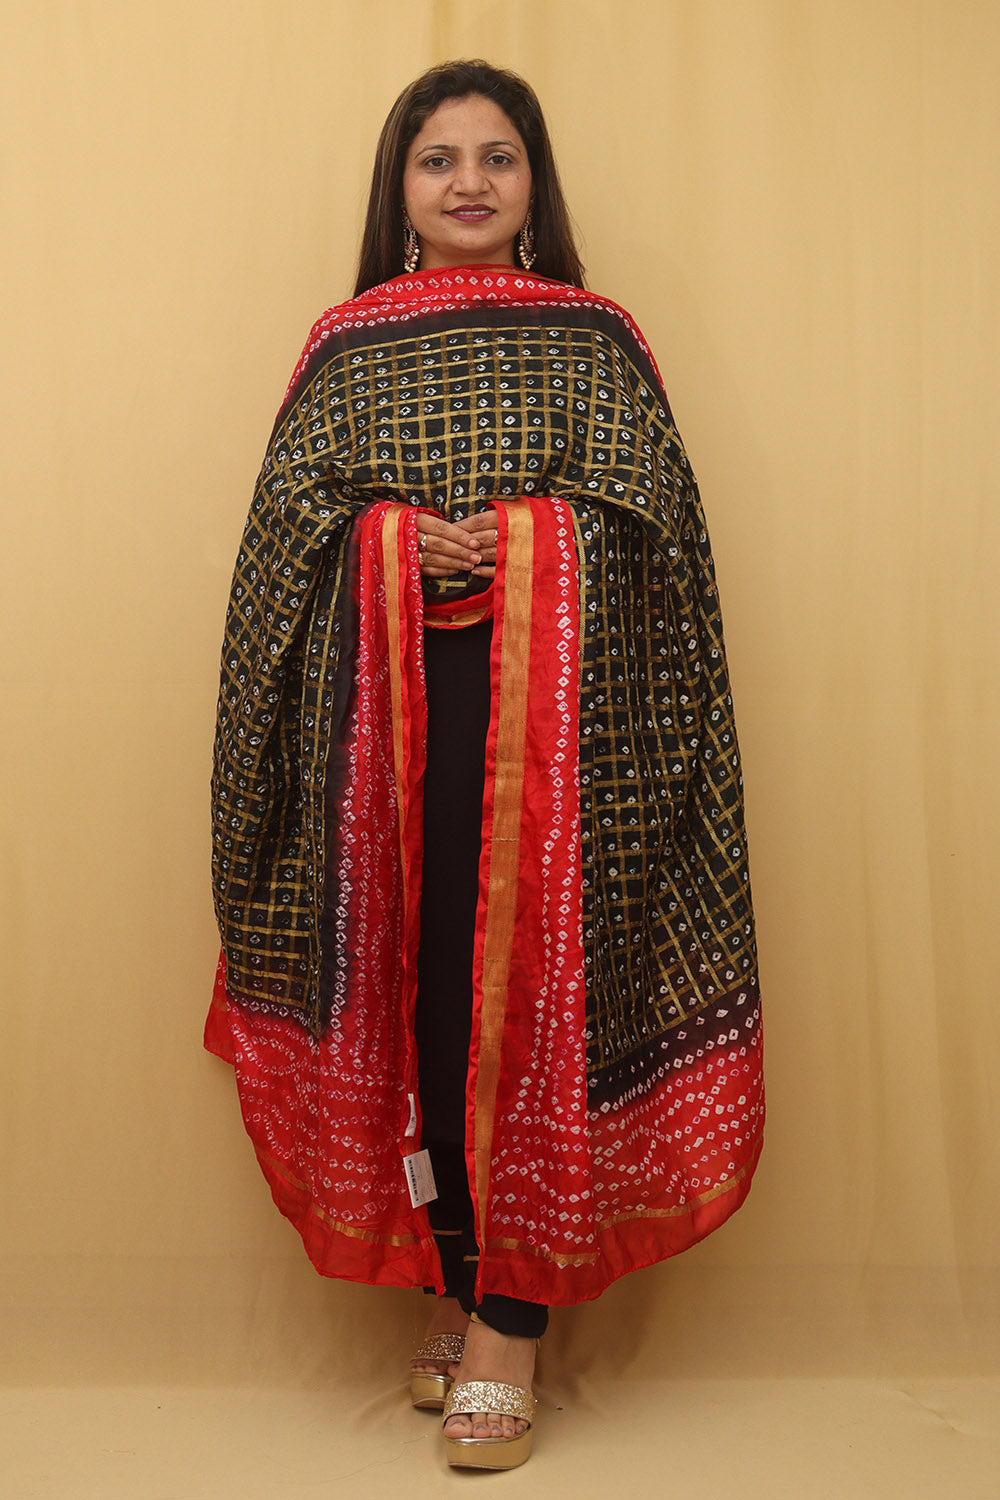 Stylish Black Bandhani Silk Dupatta - Perfect Accessory for Any Outfit - Luxurion World